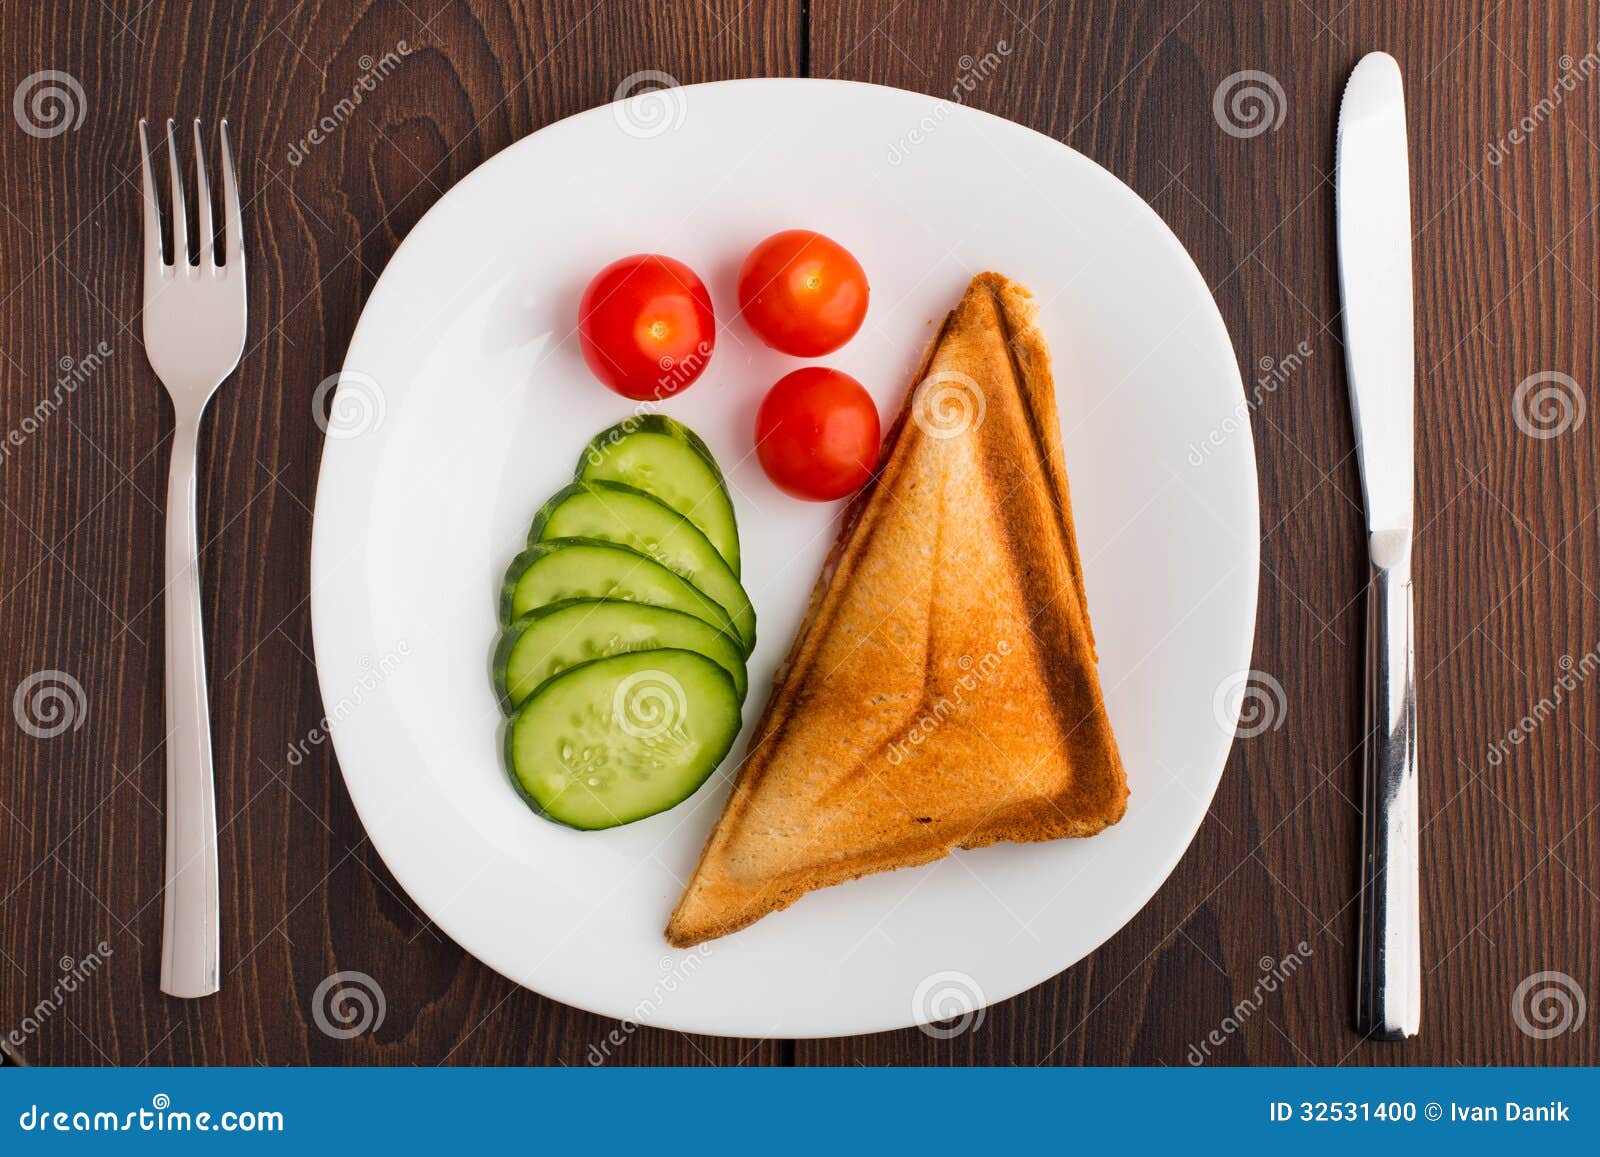 Grilled Sandwich with Vegetables on Plate Stock Photo - Image of fried ...